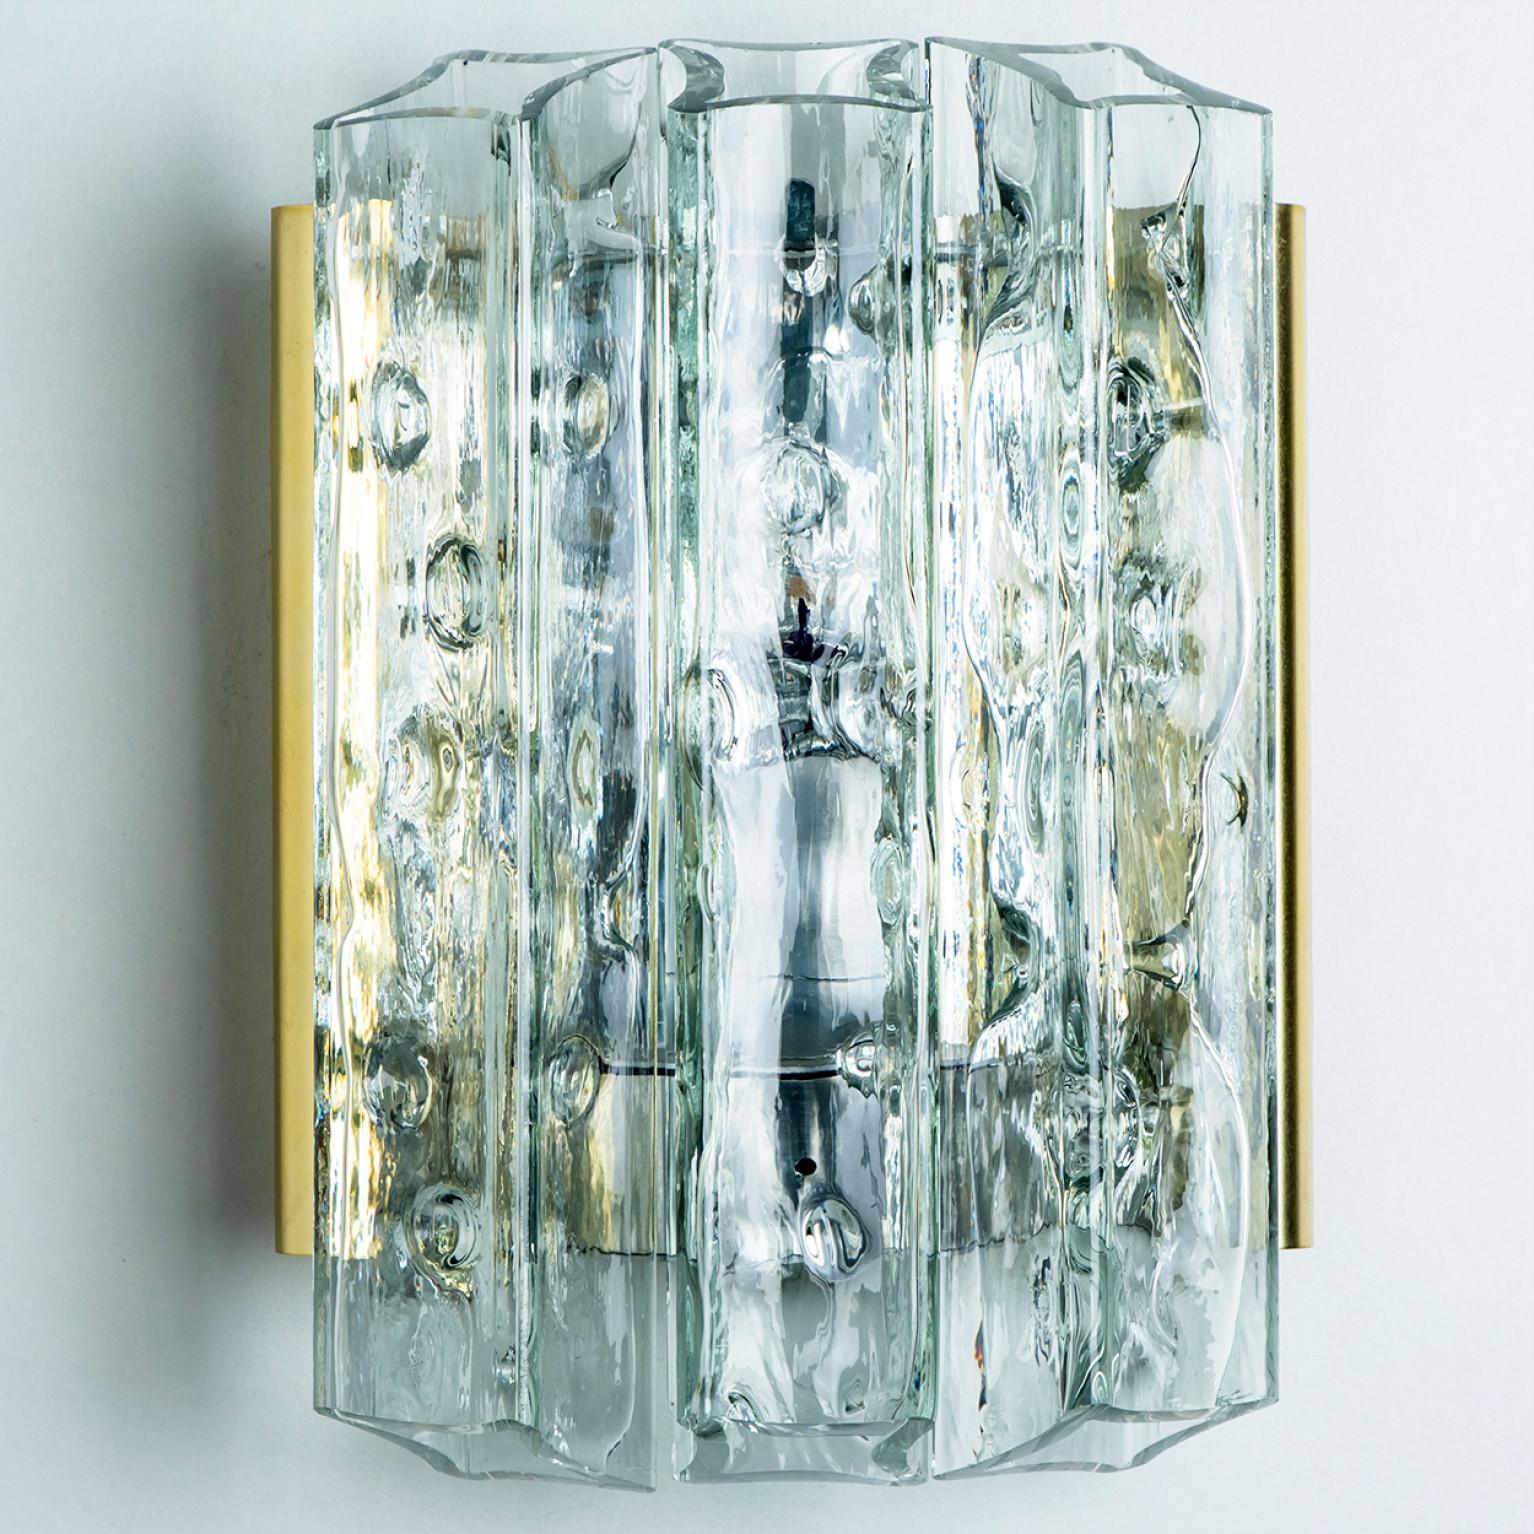 German Pair of Faceted Tubes Wall Lights by Doria Leuchten, 1960s For Sale